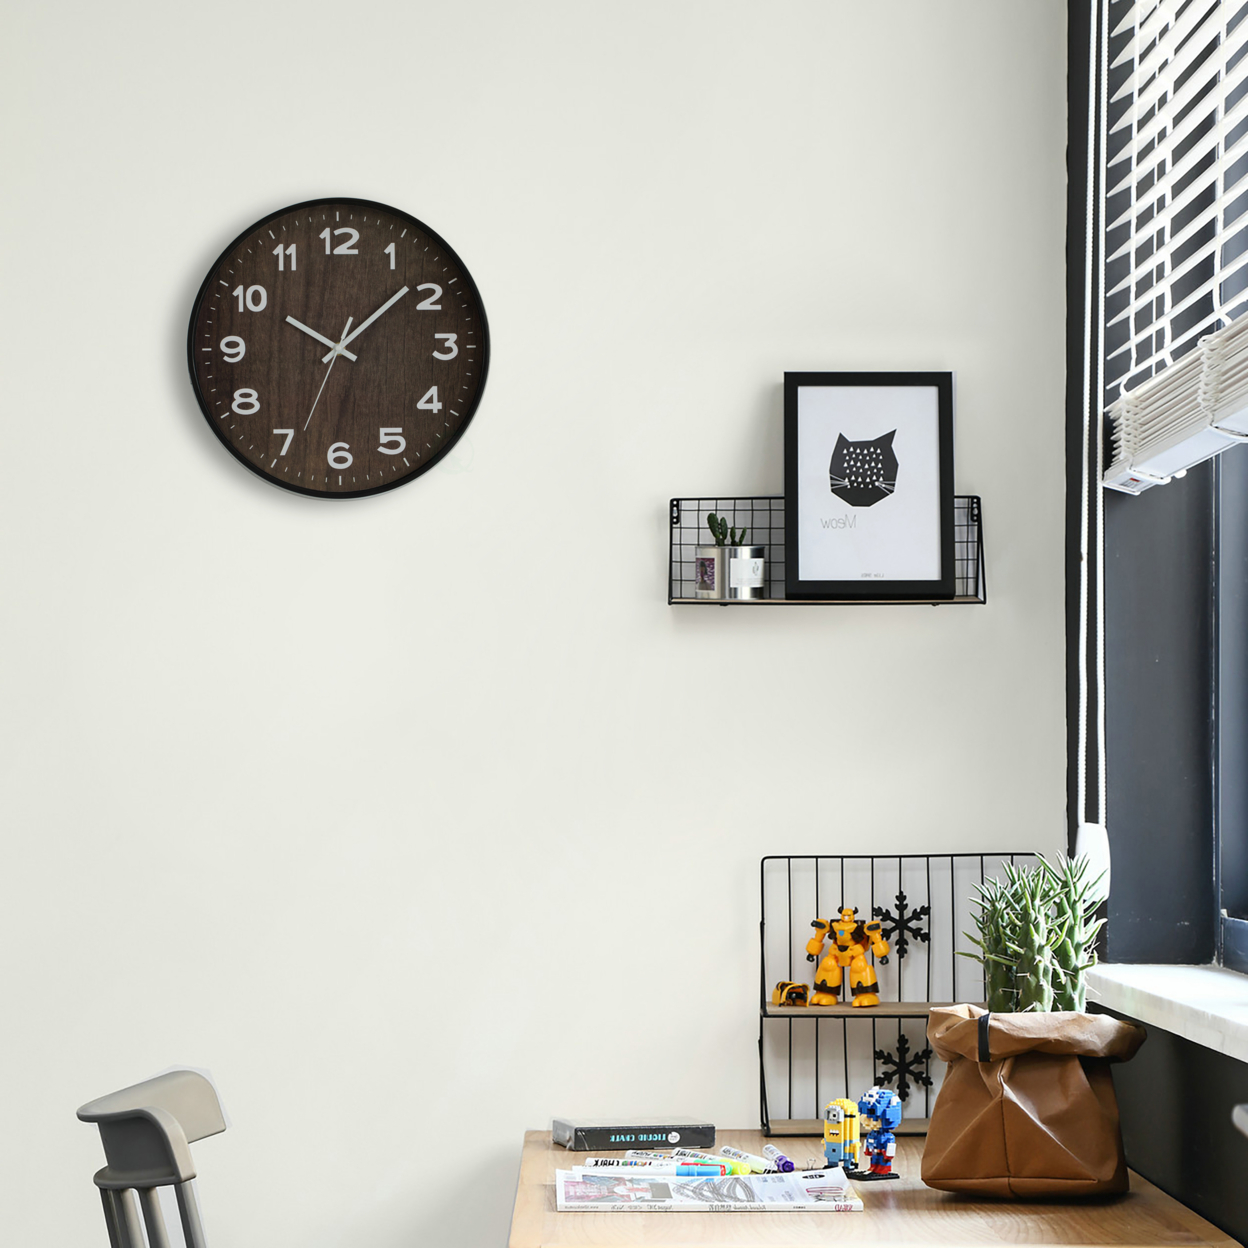 Decorative Modern Round Wood- Looking Plastic Wall Clock For Living Room, Kitchen, Or Dining Room - Oak